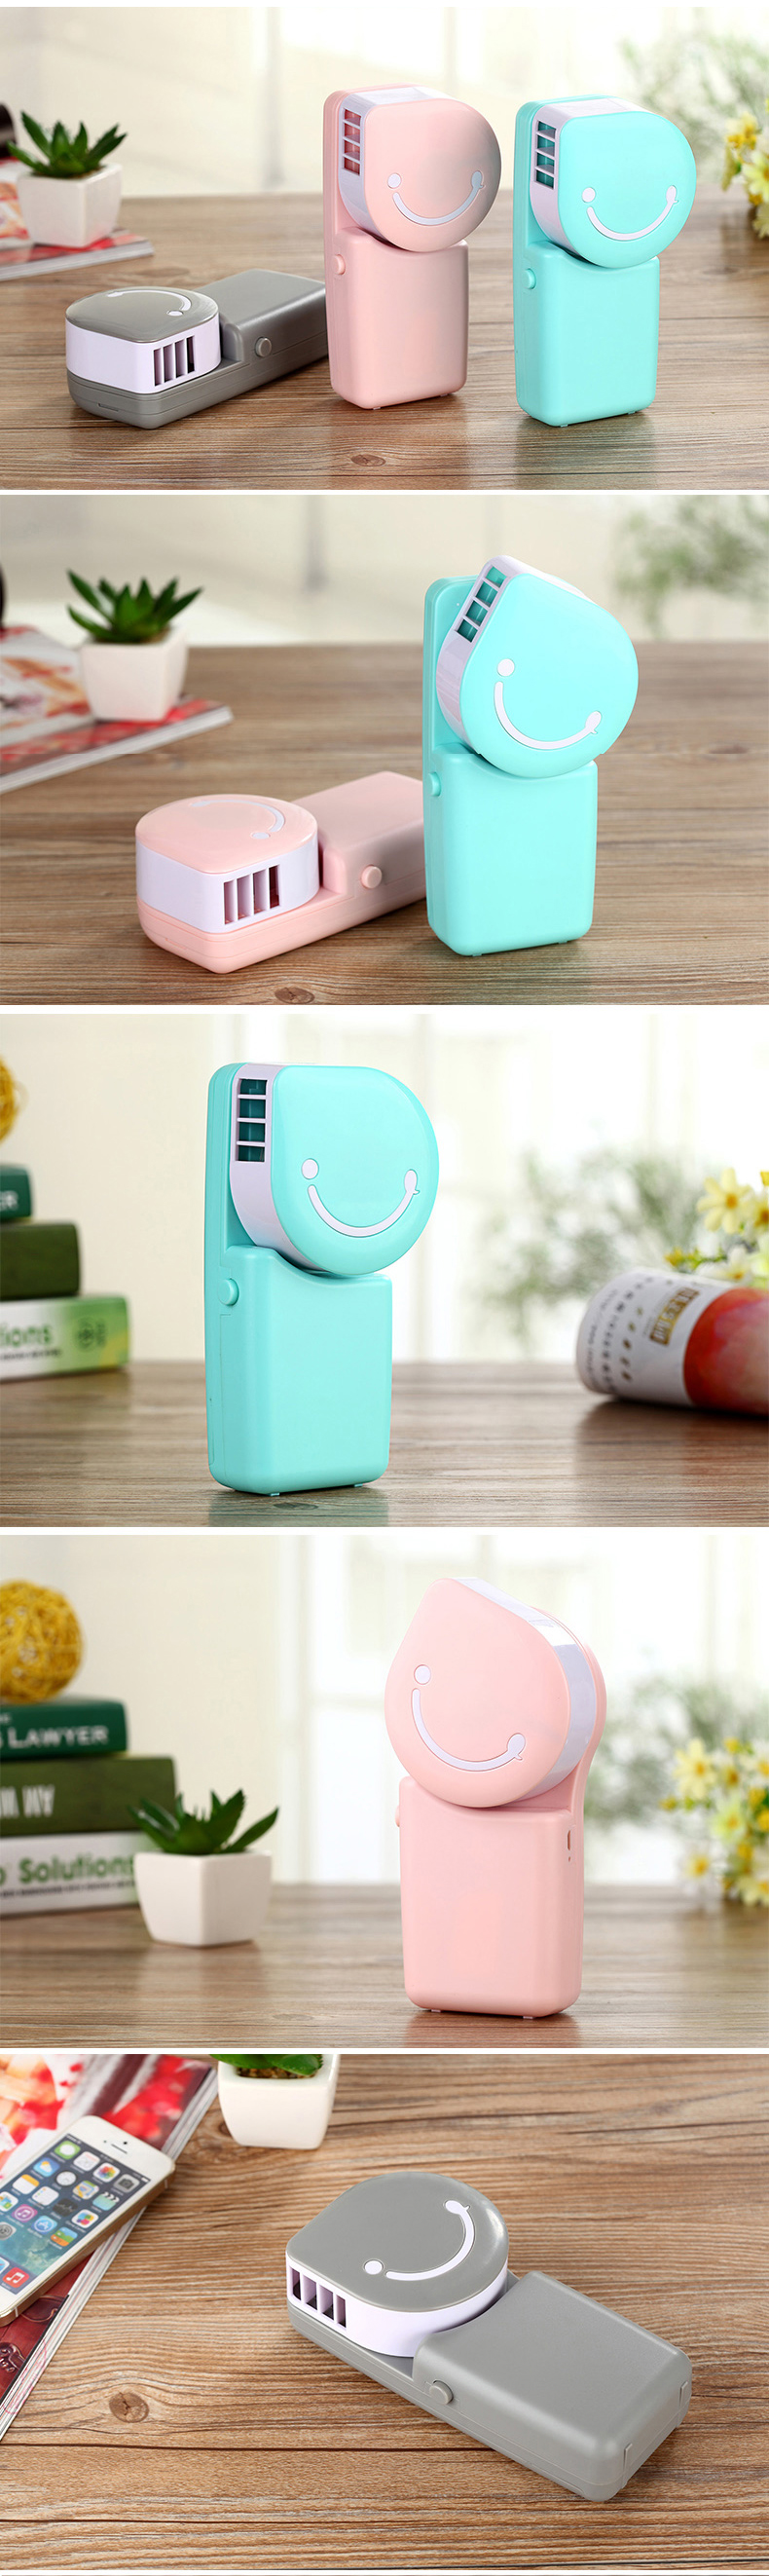 Loskii LX-882 Summer Mini Fan Cooling Portable Air Conditioning USB Charge Hand-held Cool Fan 83